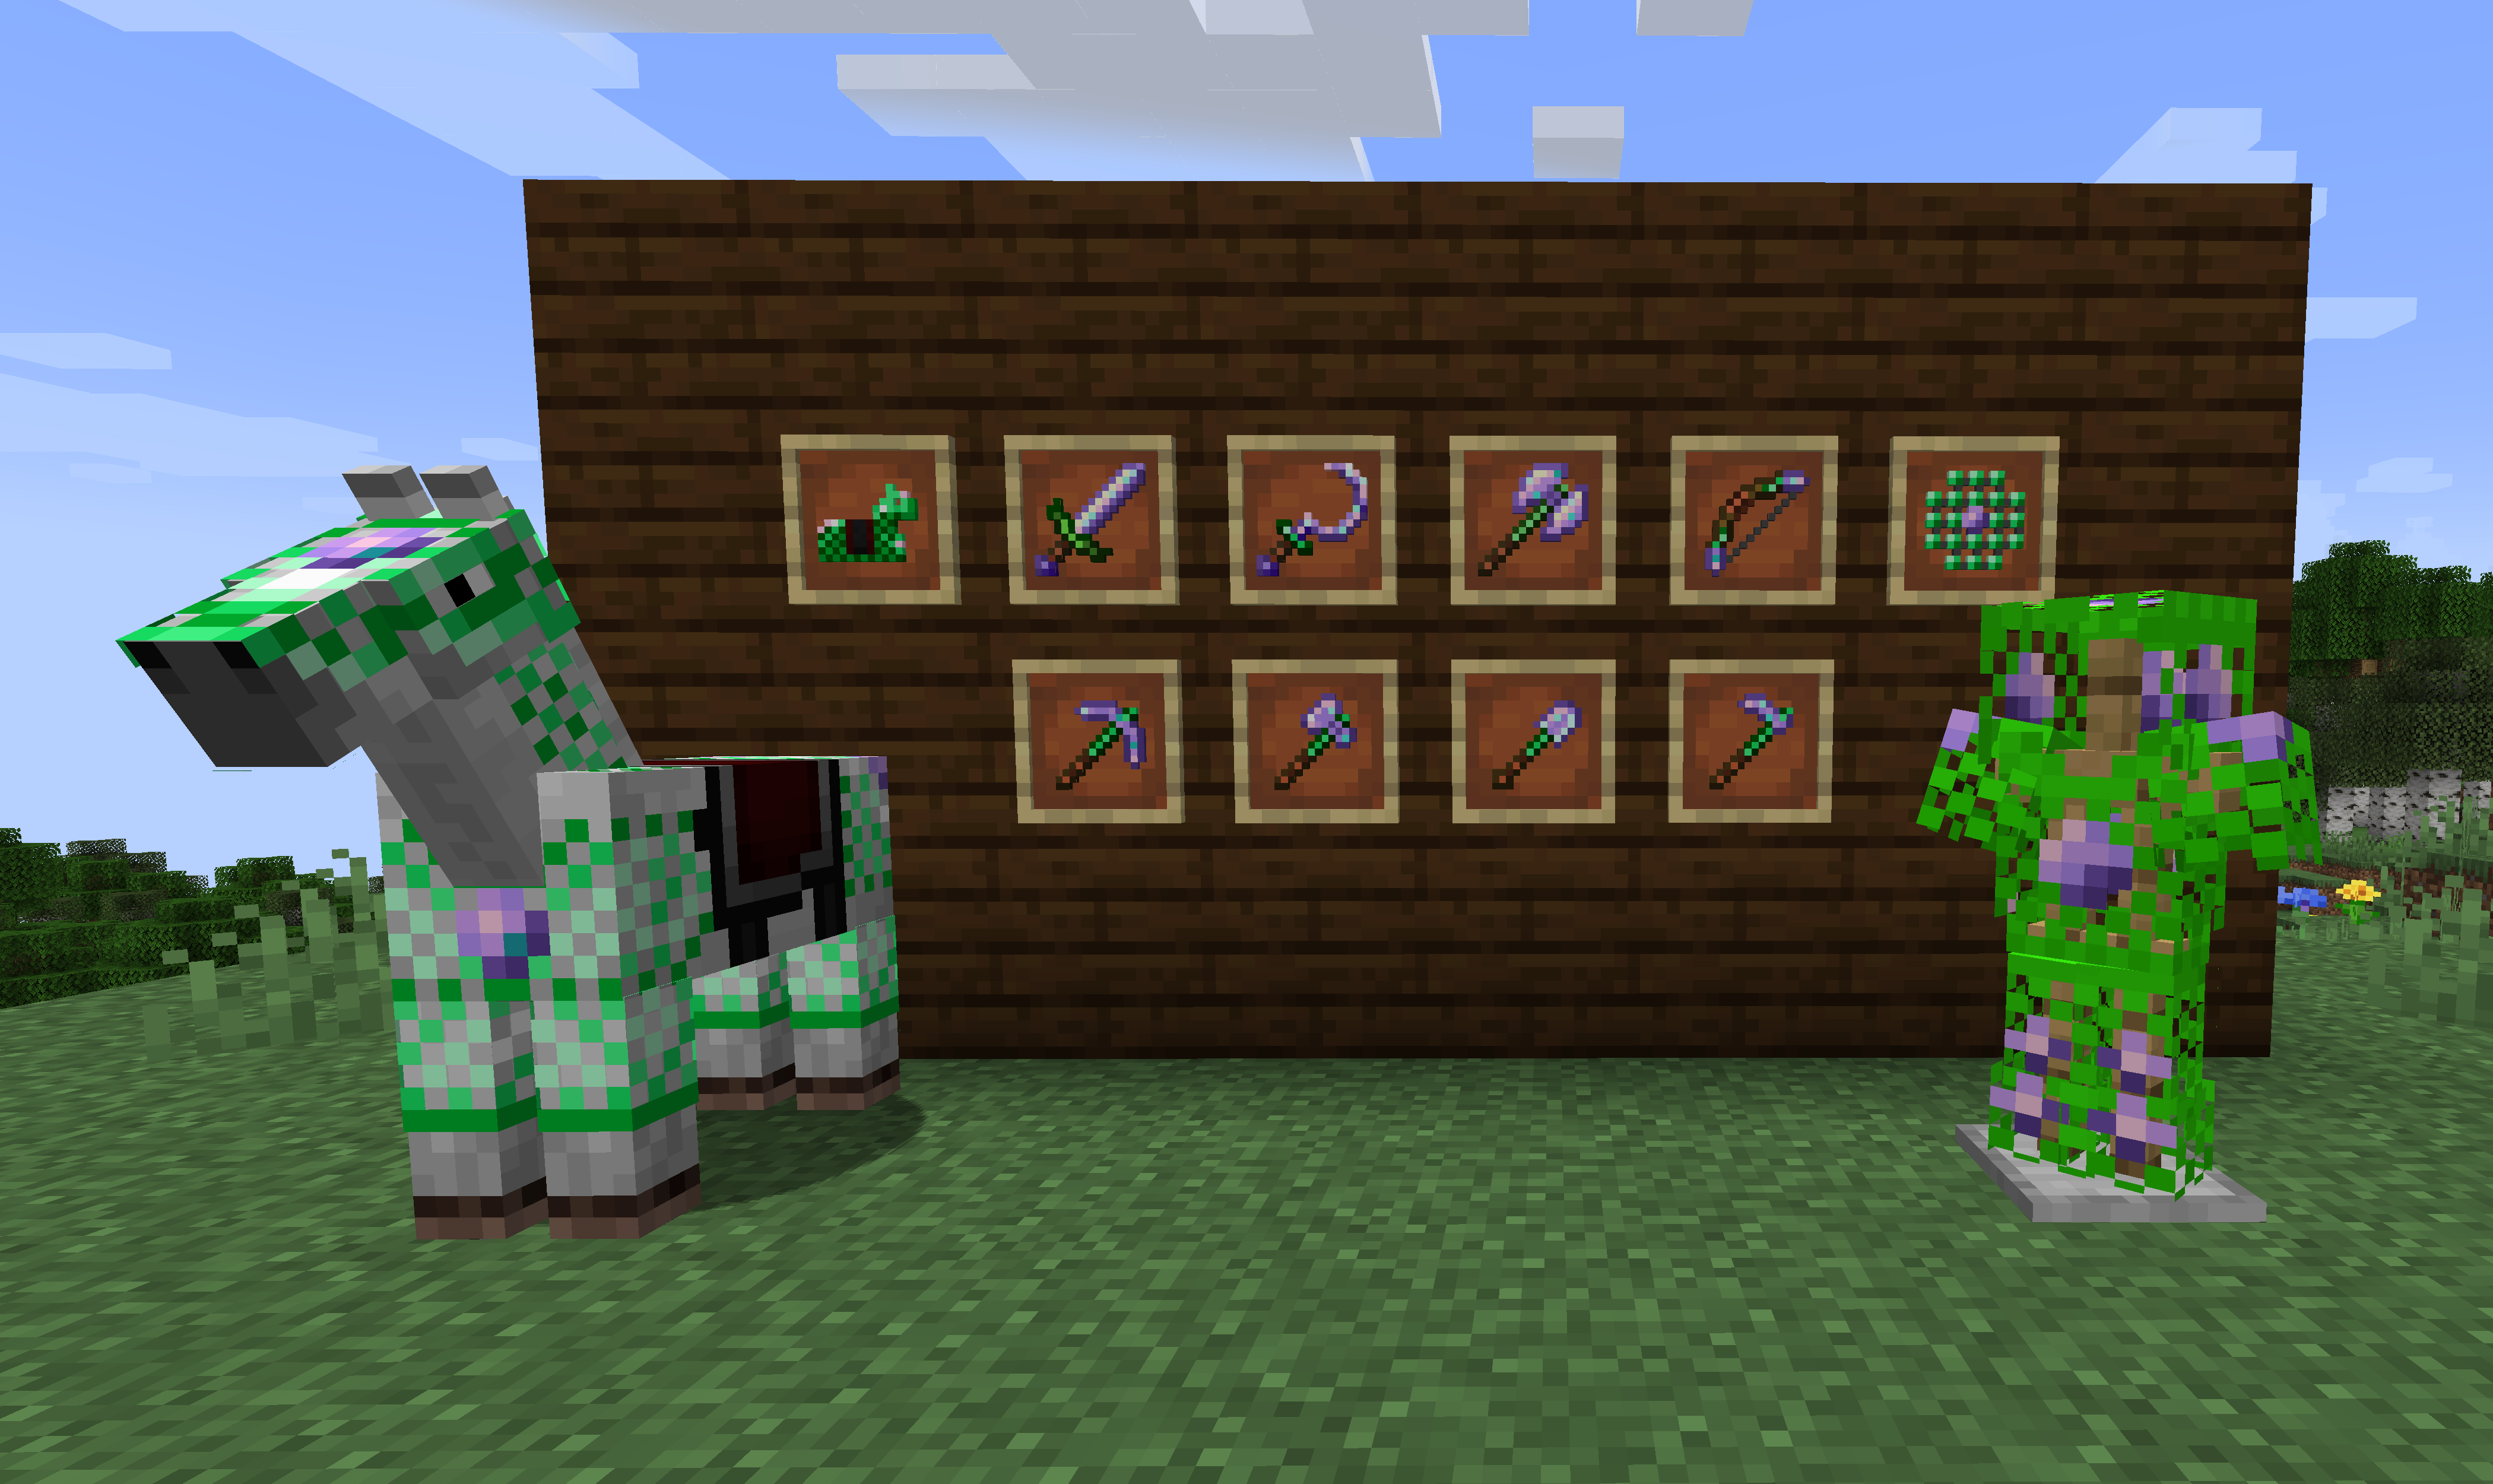 Diamethyst Emerald Weapons, Tools, and Armor